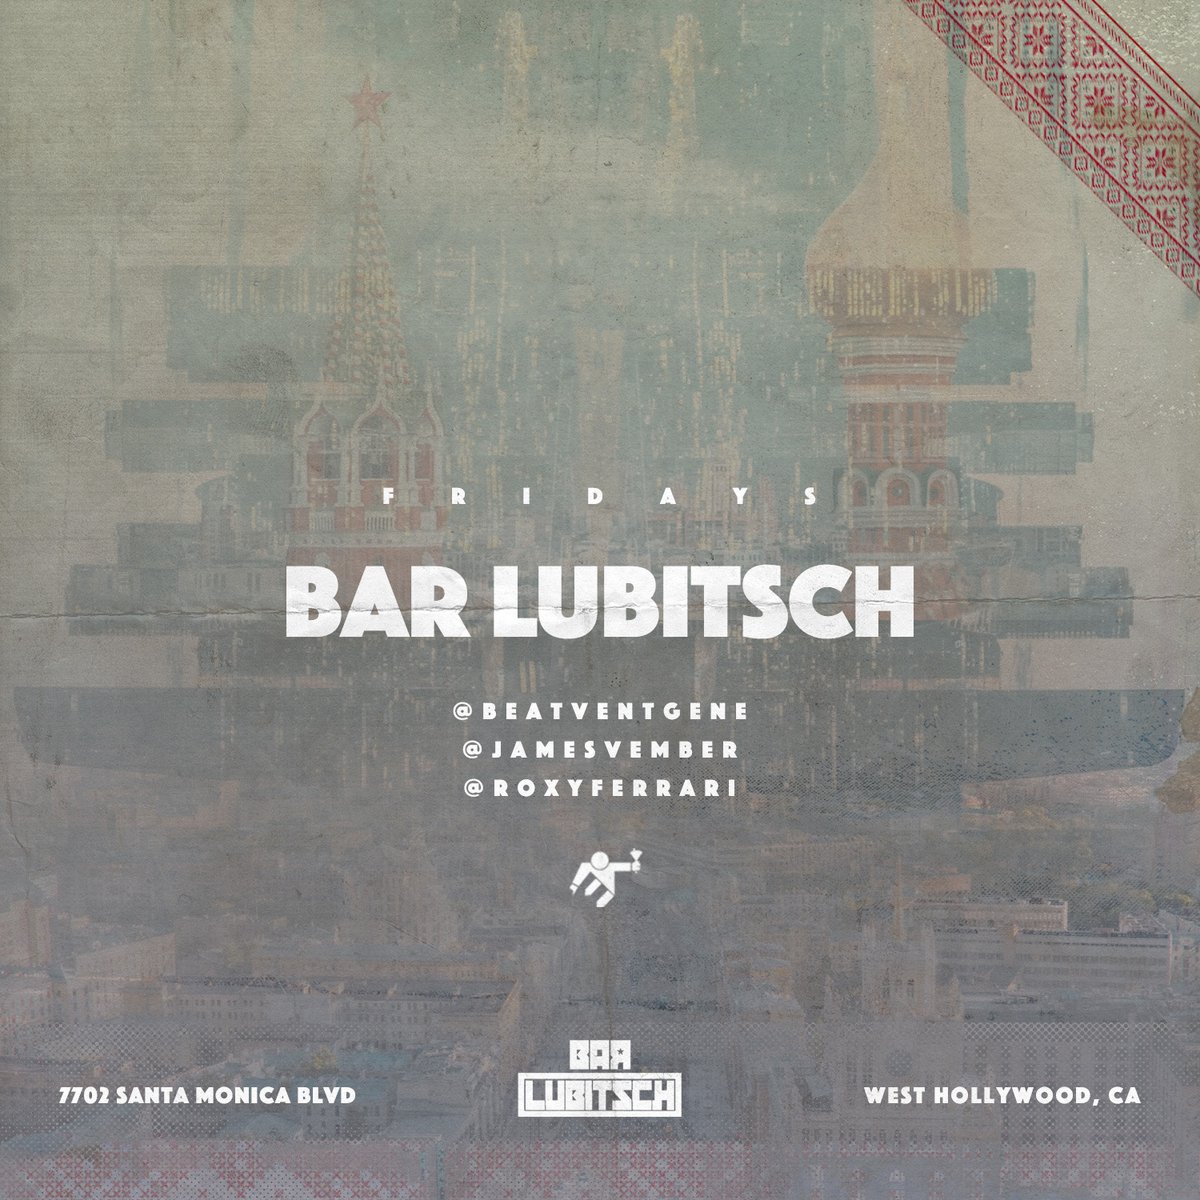 Lubitsch Friday’s!!! See you on the dance-floor!!!!